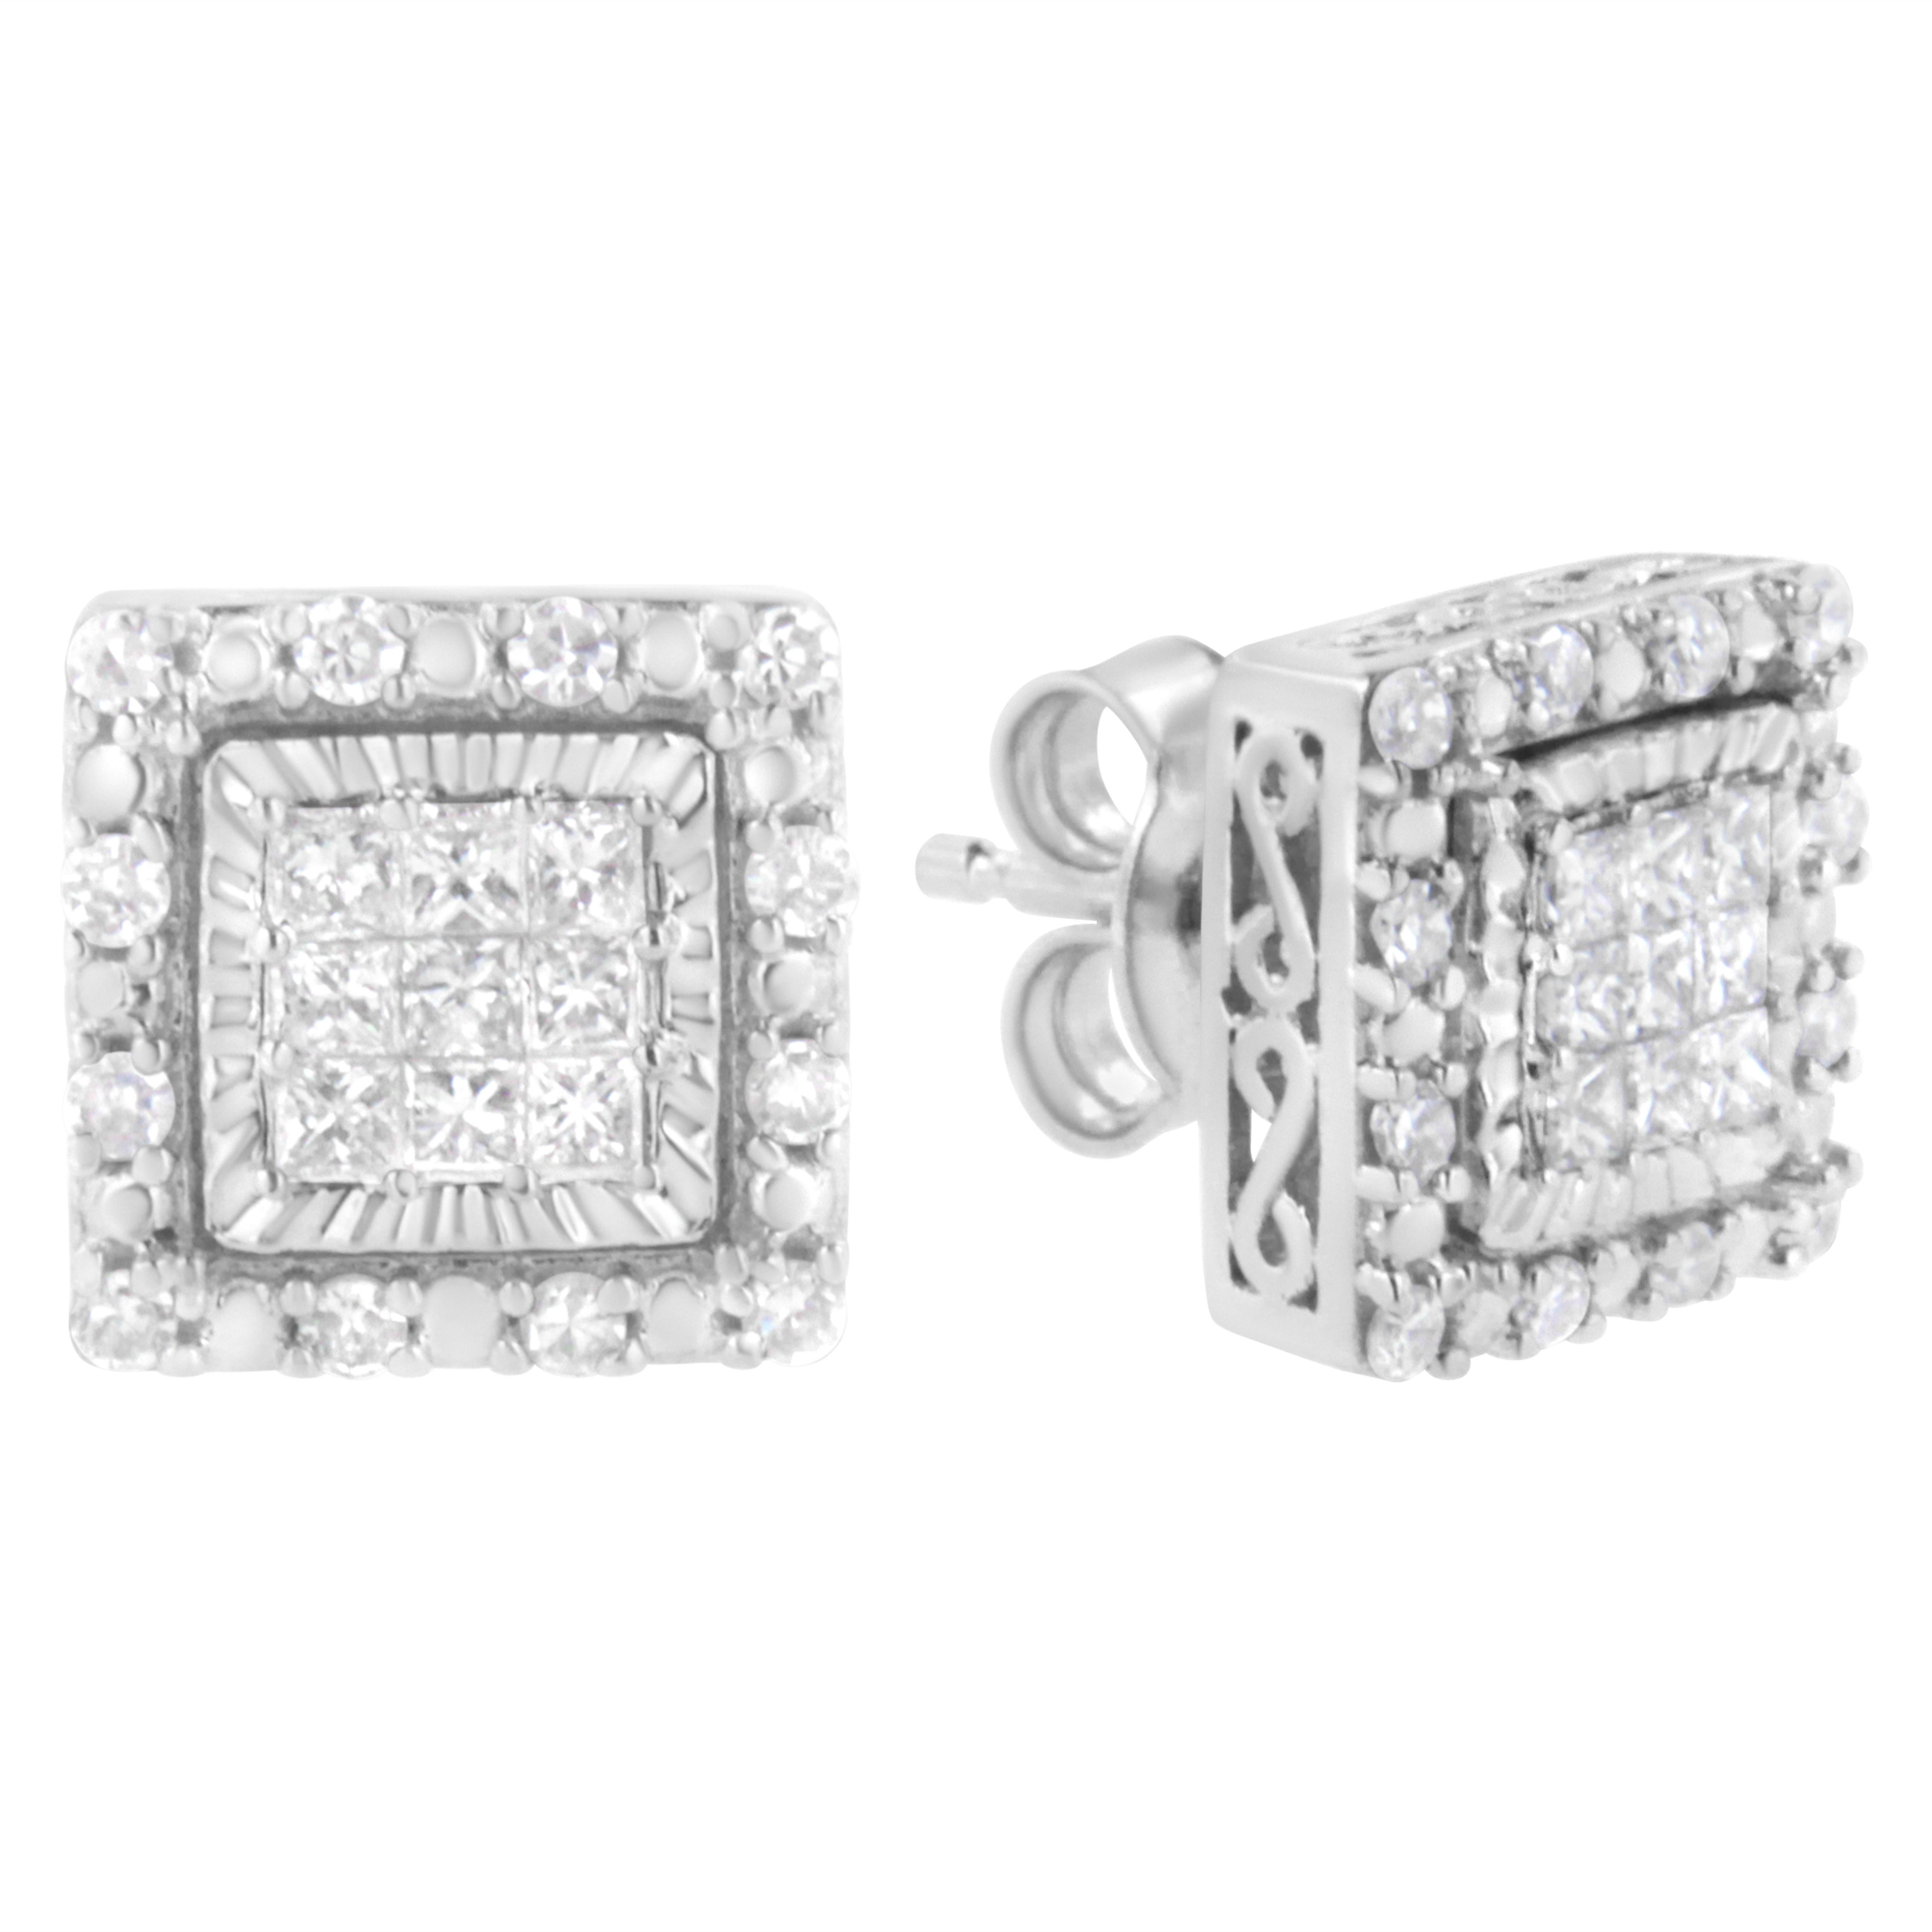 Add sparkle to your day with these 10k white gold princess earrings. Each earring features 9 princess cut diamonds wrapped in a white gold ribbon as the centerpiece of the design. A glimmering round cut diamond halo frames the central design. A